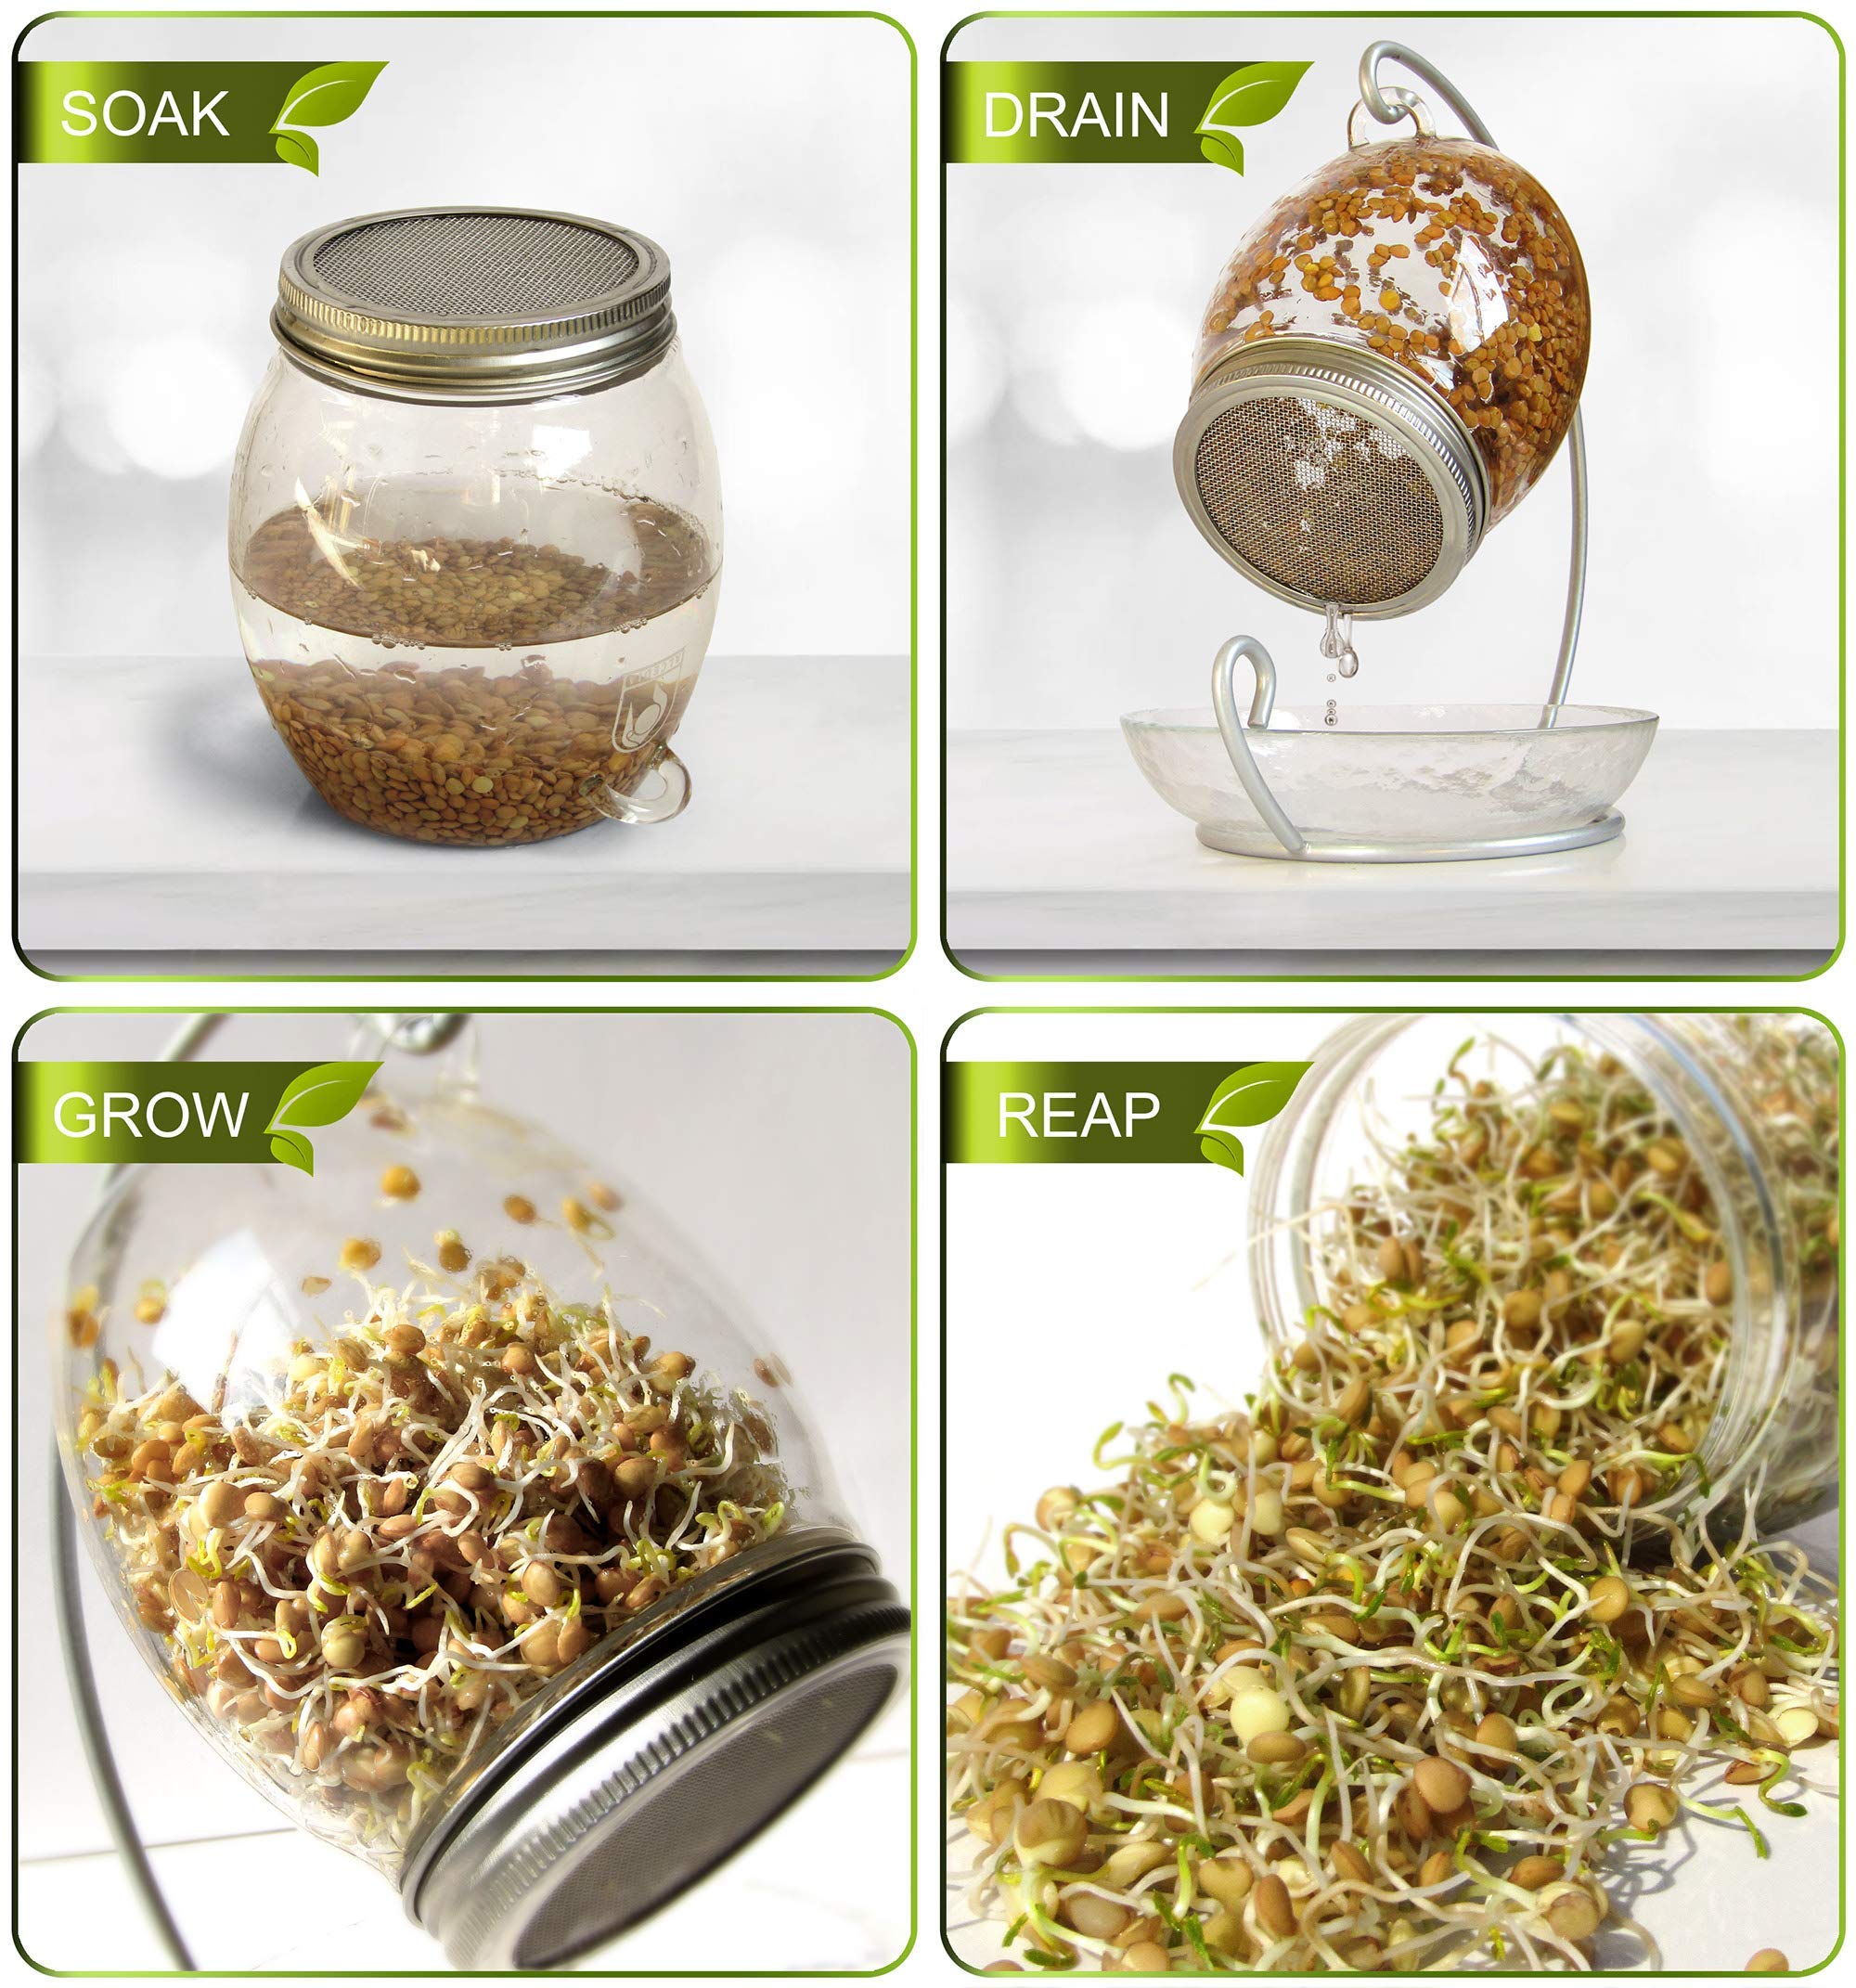 Premium Sprouting Jar Kit - Unique 30 oz Wide Mouth Sprouting Jar, Stand, Tray and 316 Stainless Screen Lid | Decorative Indoor Seed Sprouter and Germinator (1 Kit)